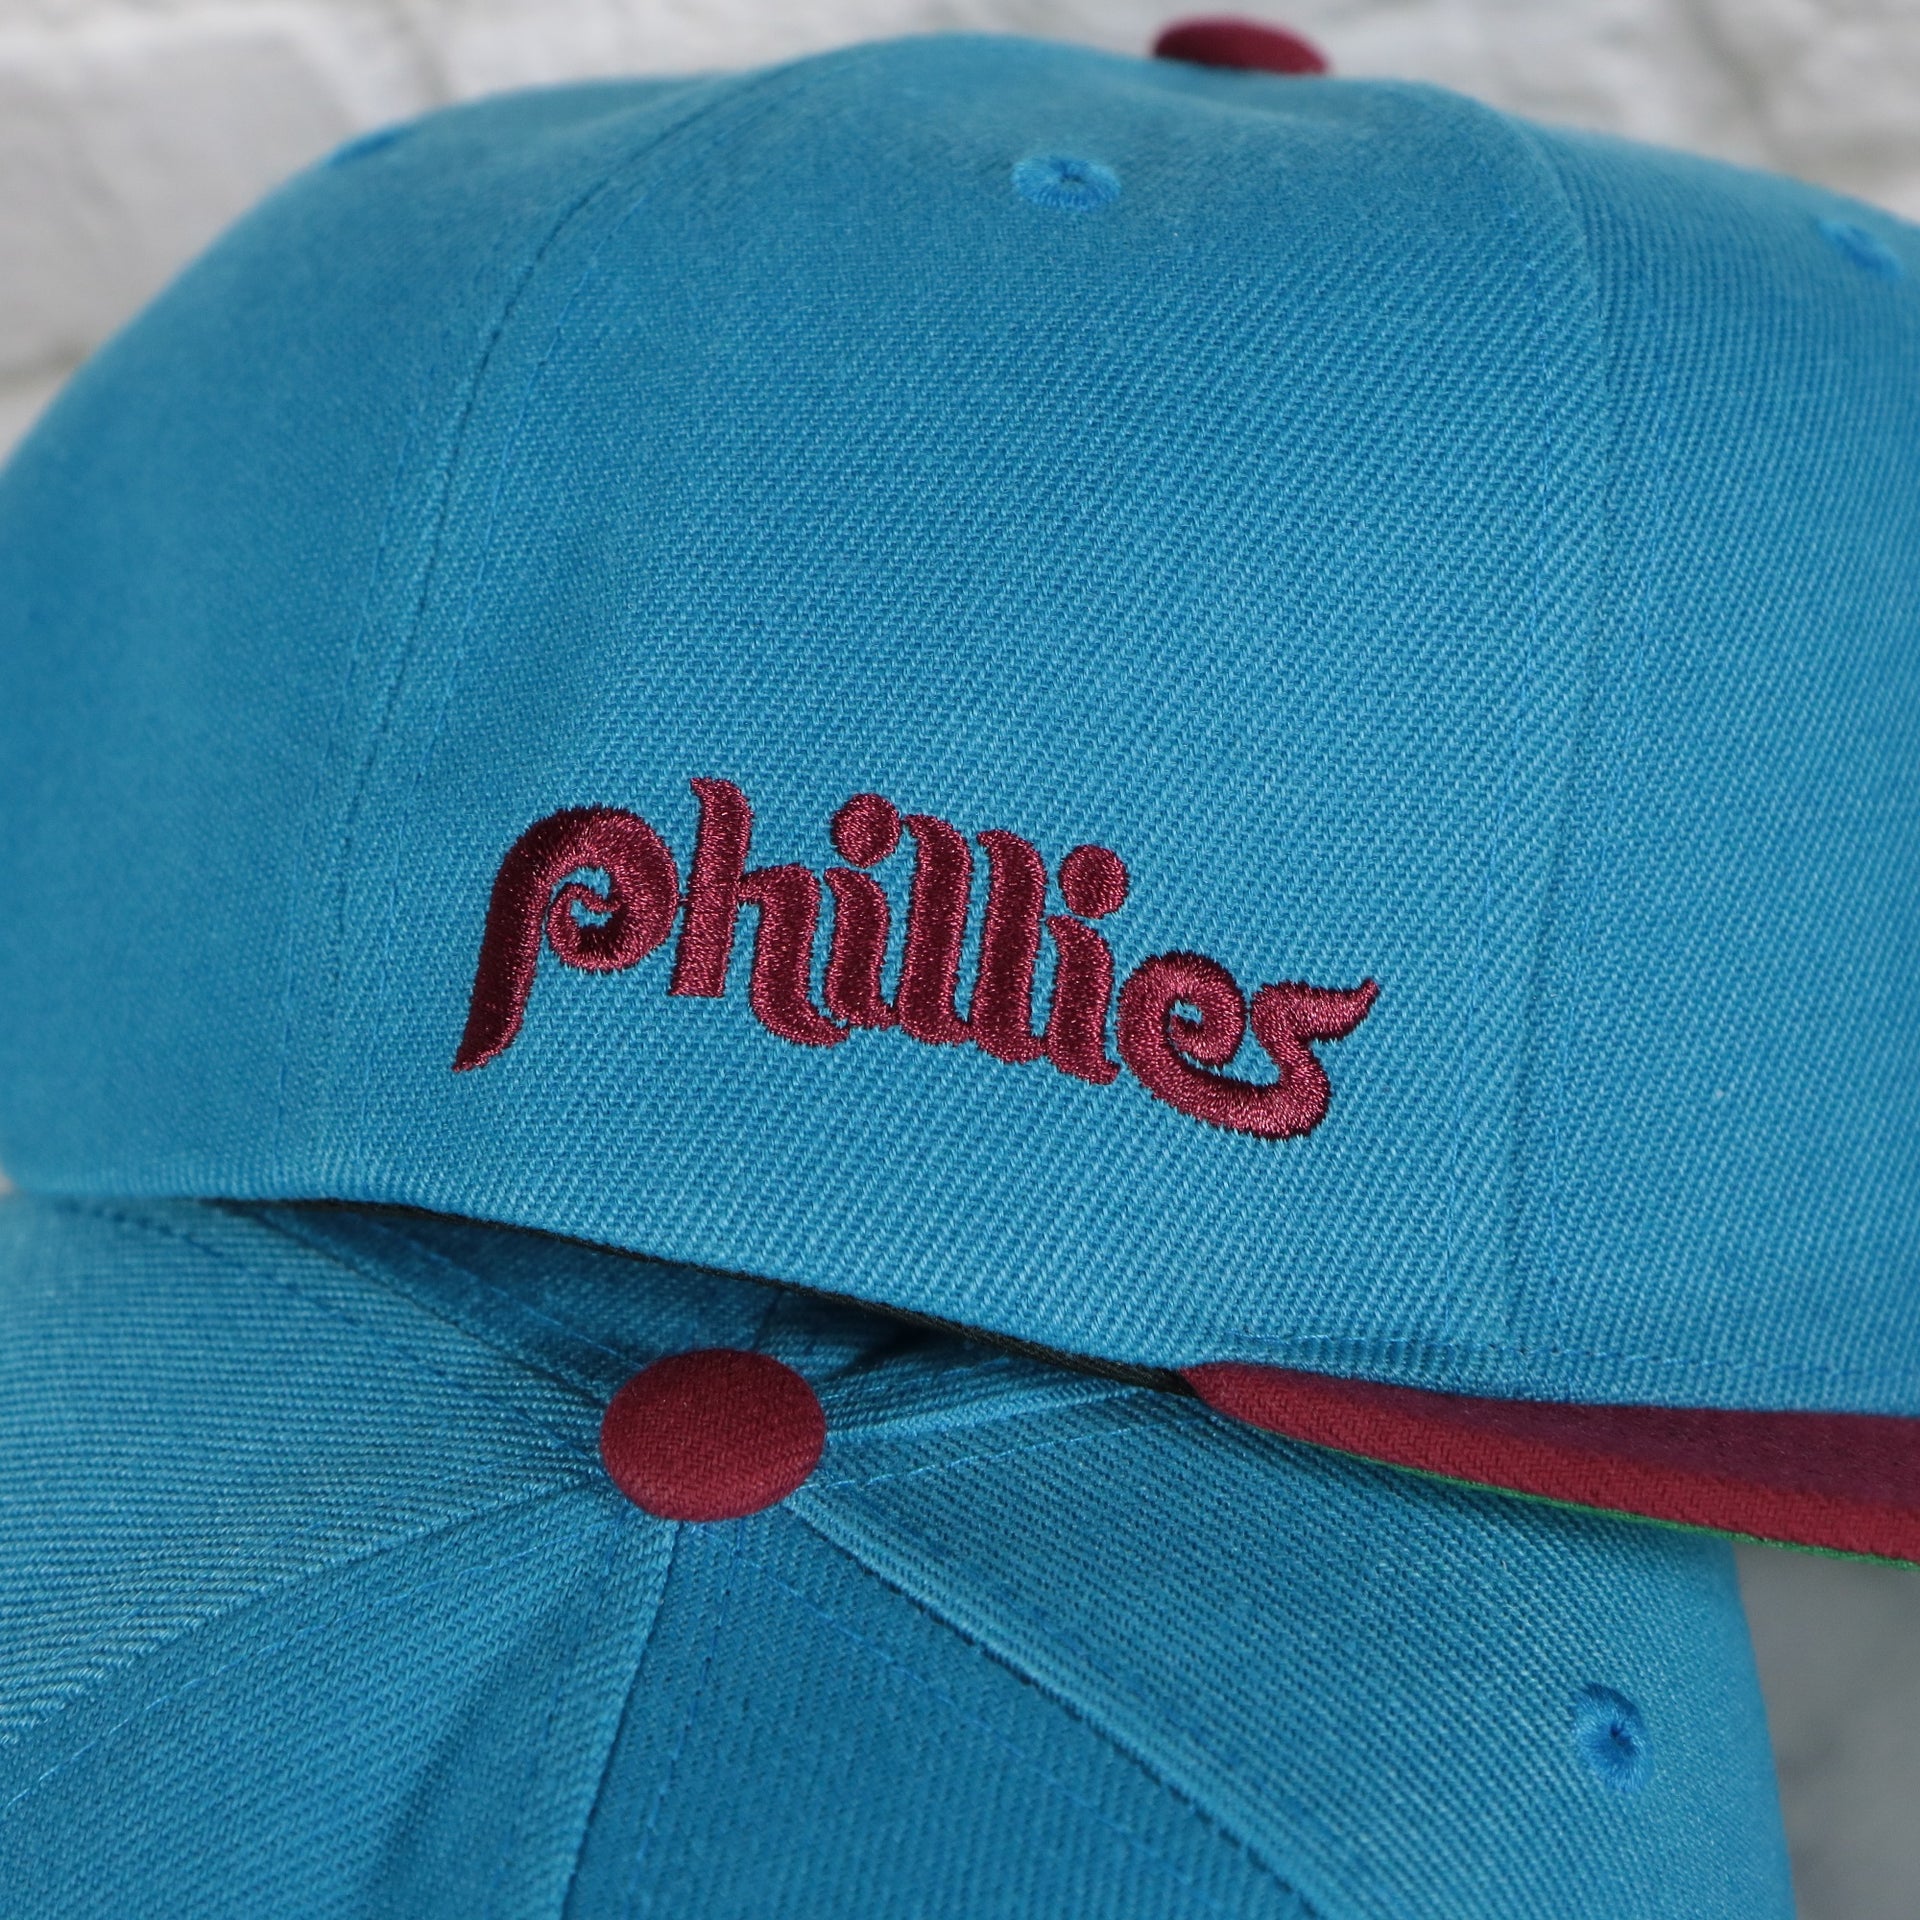 phillies script on the Philadelphia Phillies Cooperstown "Phillies" script side patch Evergreen Pro Variety Pack | Light Blue/Maroon Snapback Hat